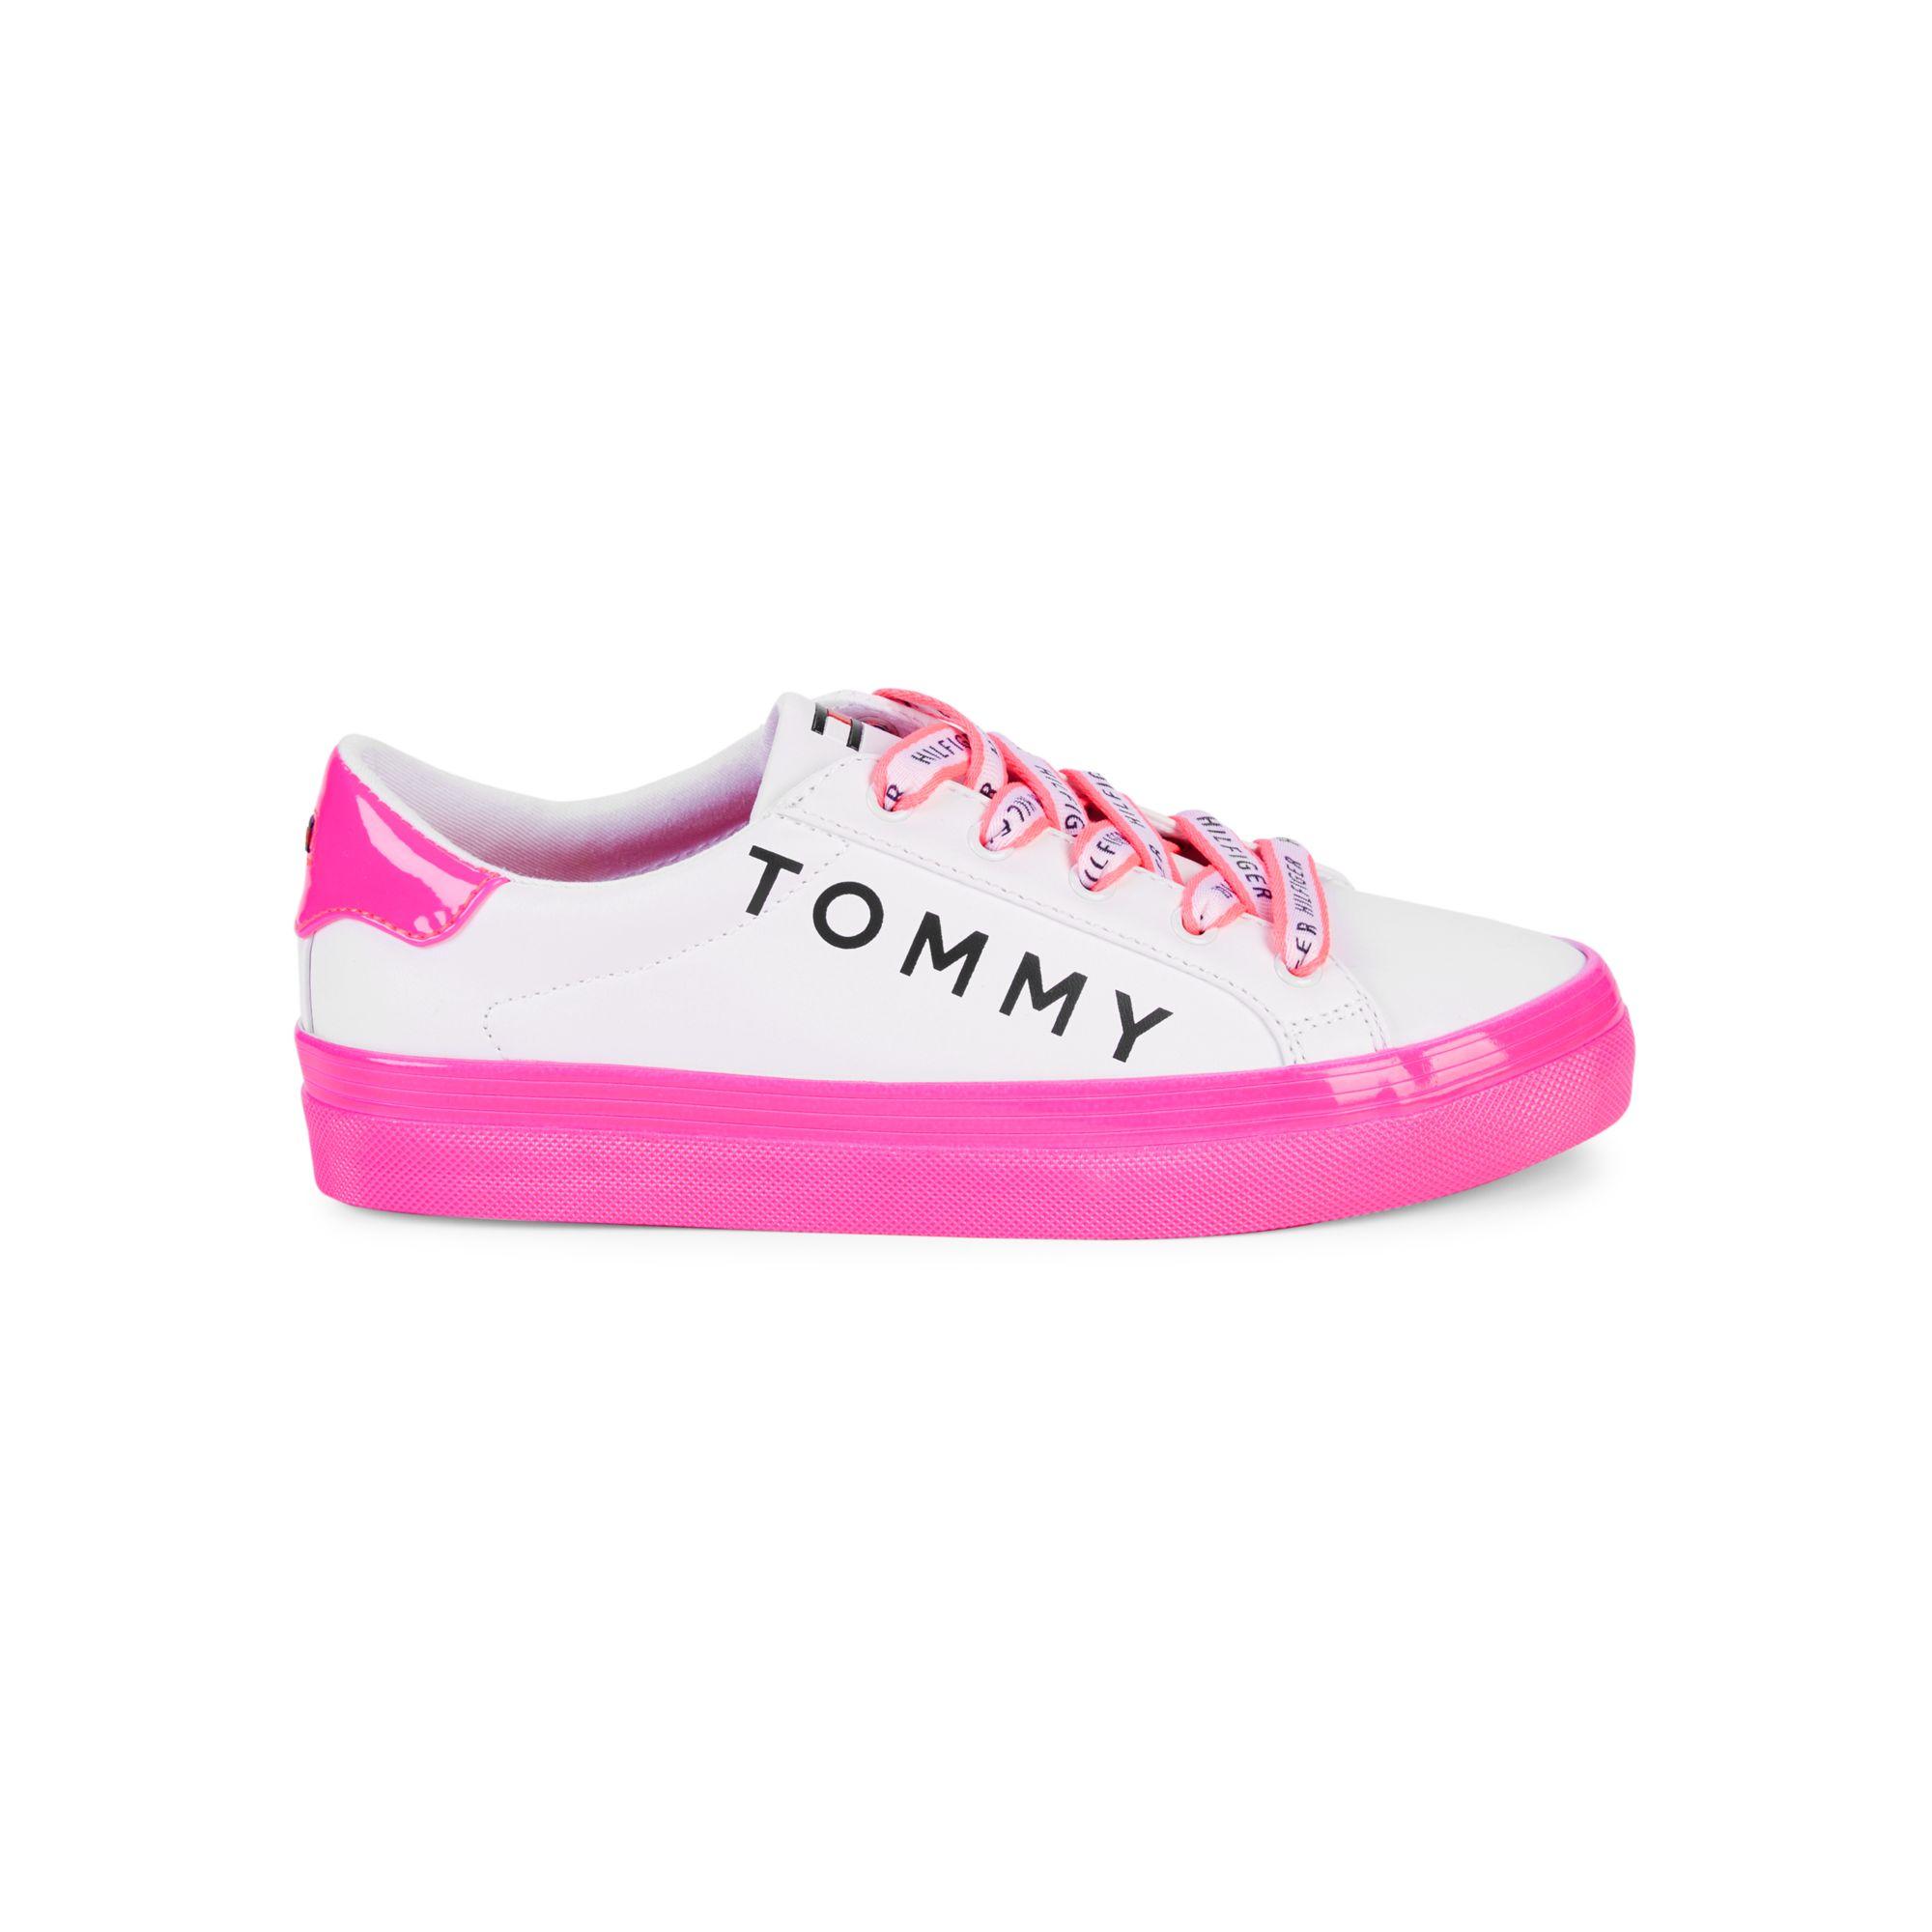 Tommy Hilfiger Foxton 2 Sneakers in Pink White (Pink) | Lyst